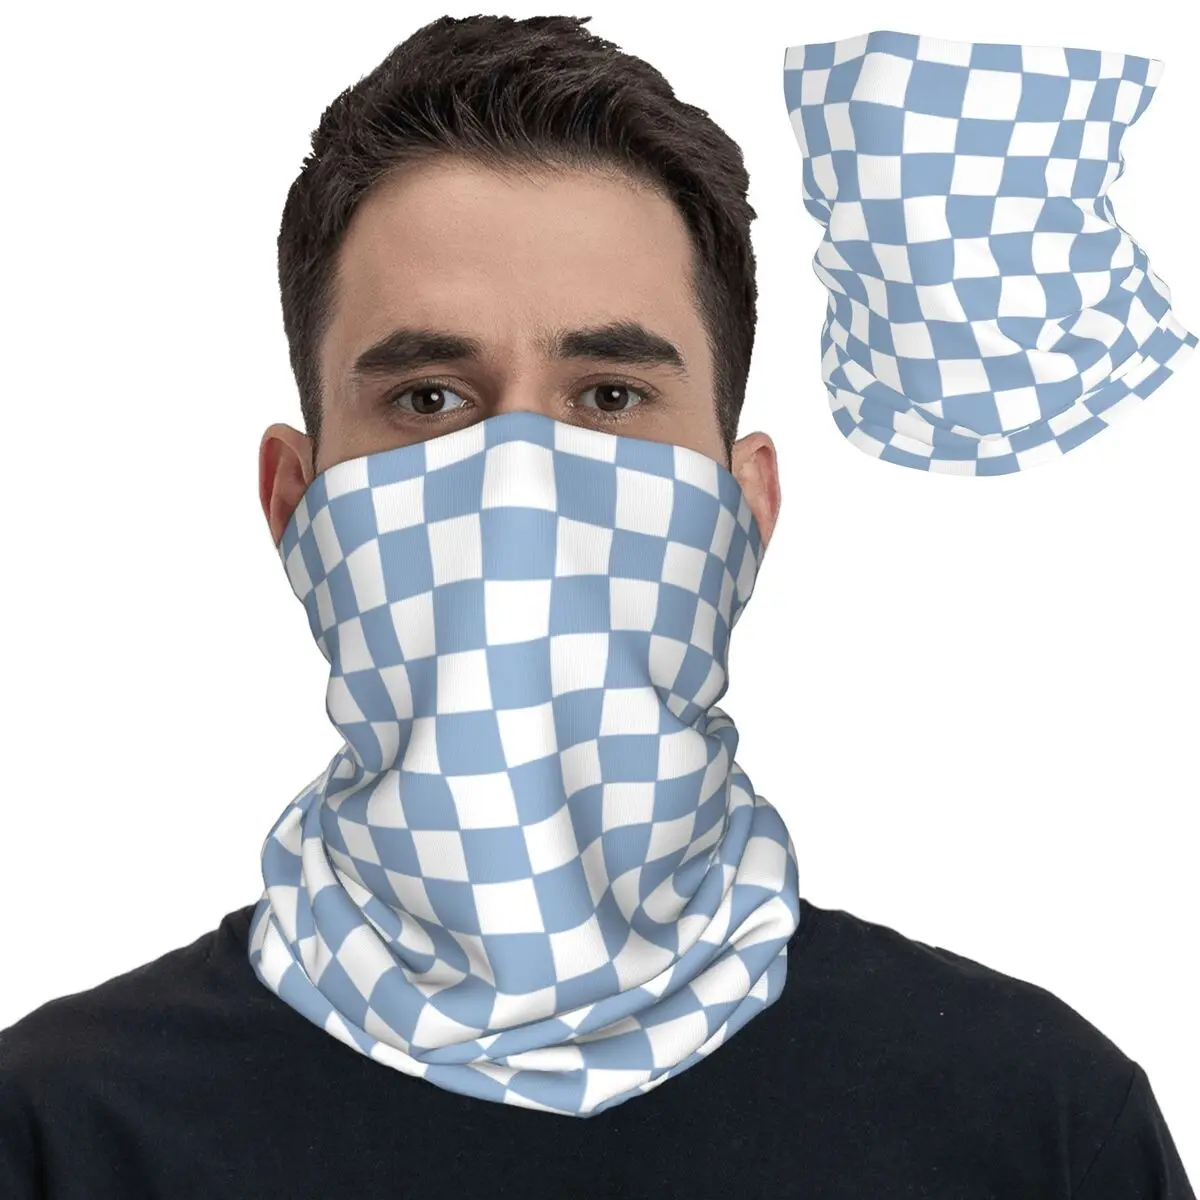 

Abstract Distorted Checkered Check Magic Scarf Accessories Neck Gaiter 70s Style Checkered Bandana Cycling Headband Windproof